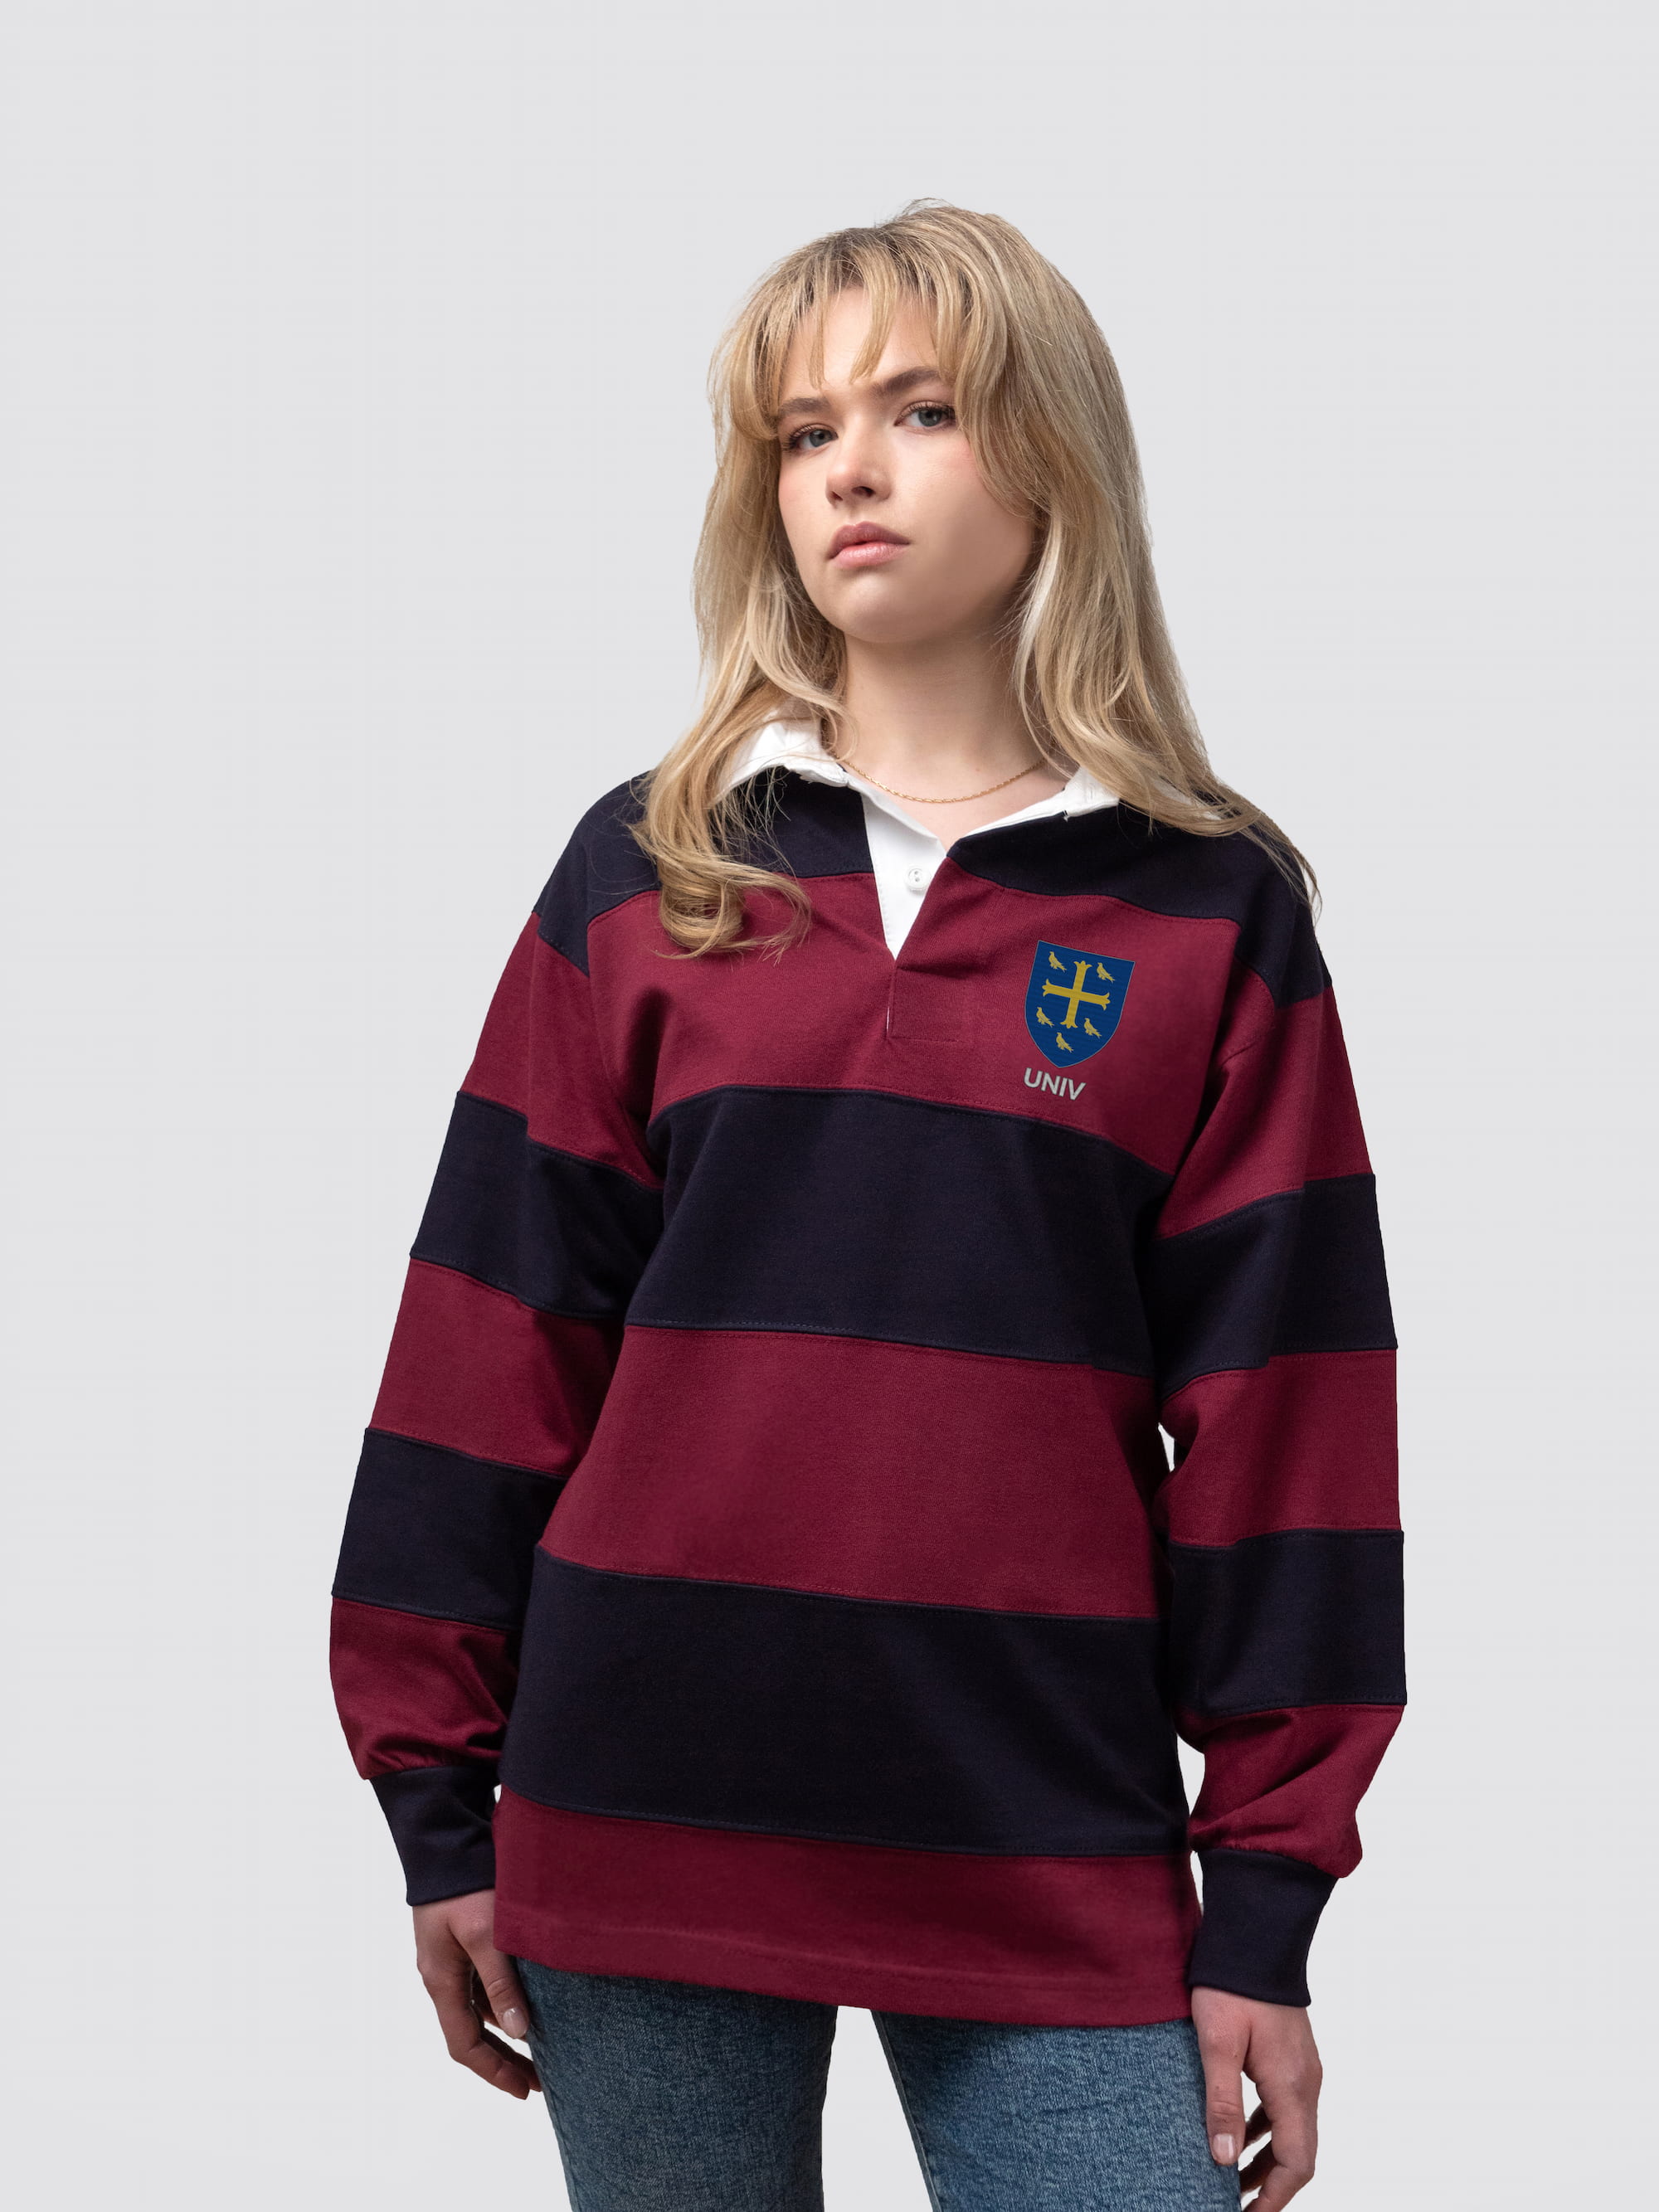 University College rugby shirt, with burgundy and navy stripes